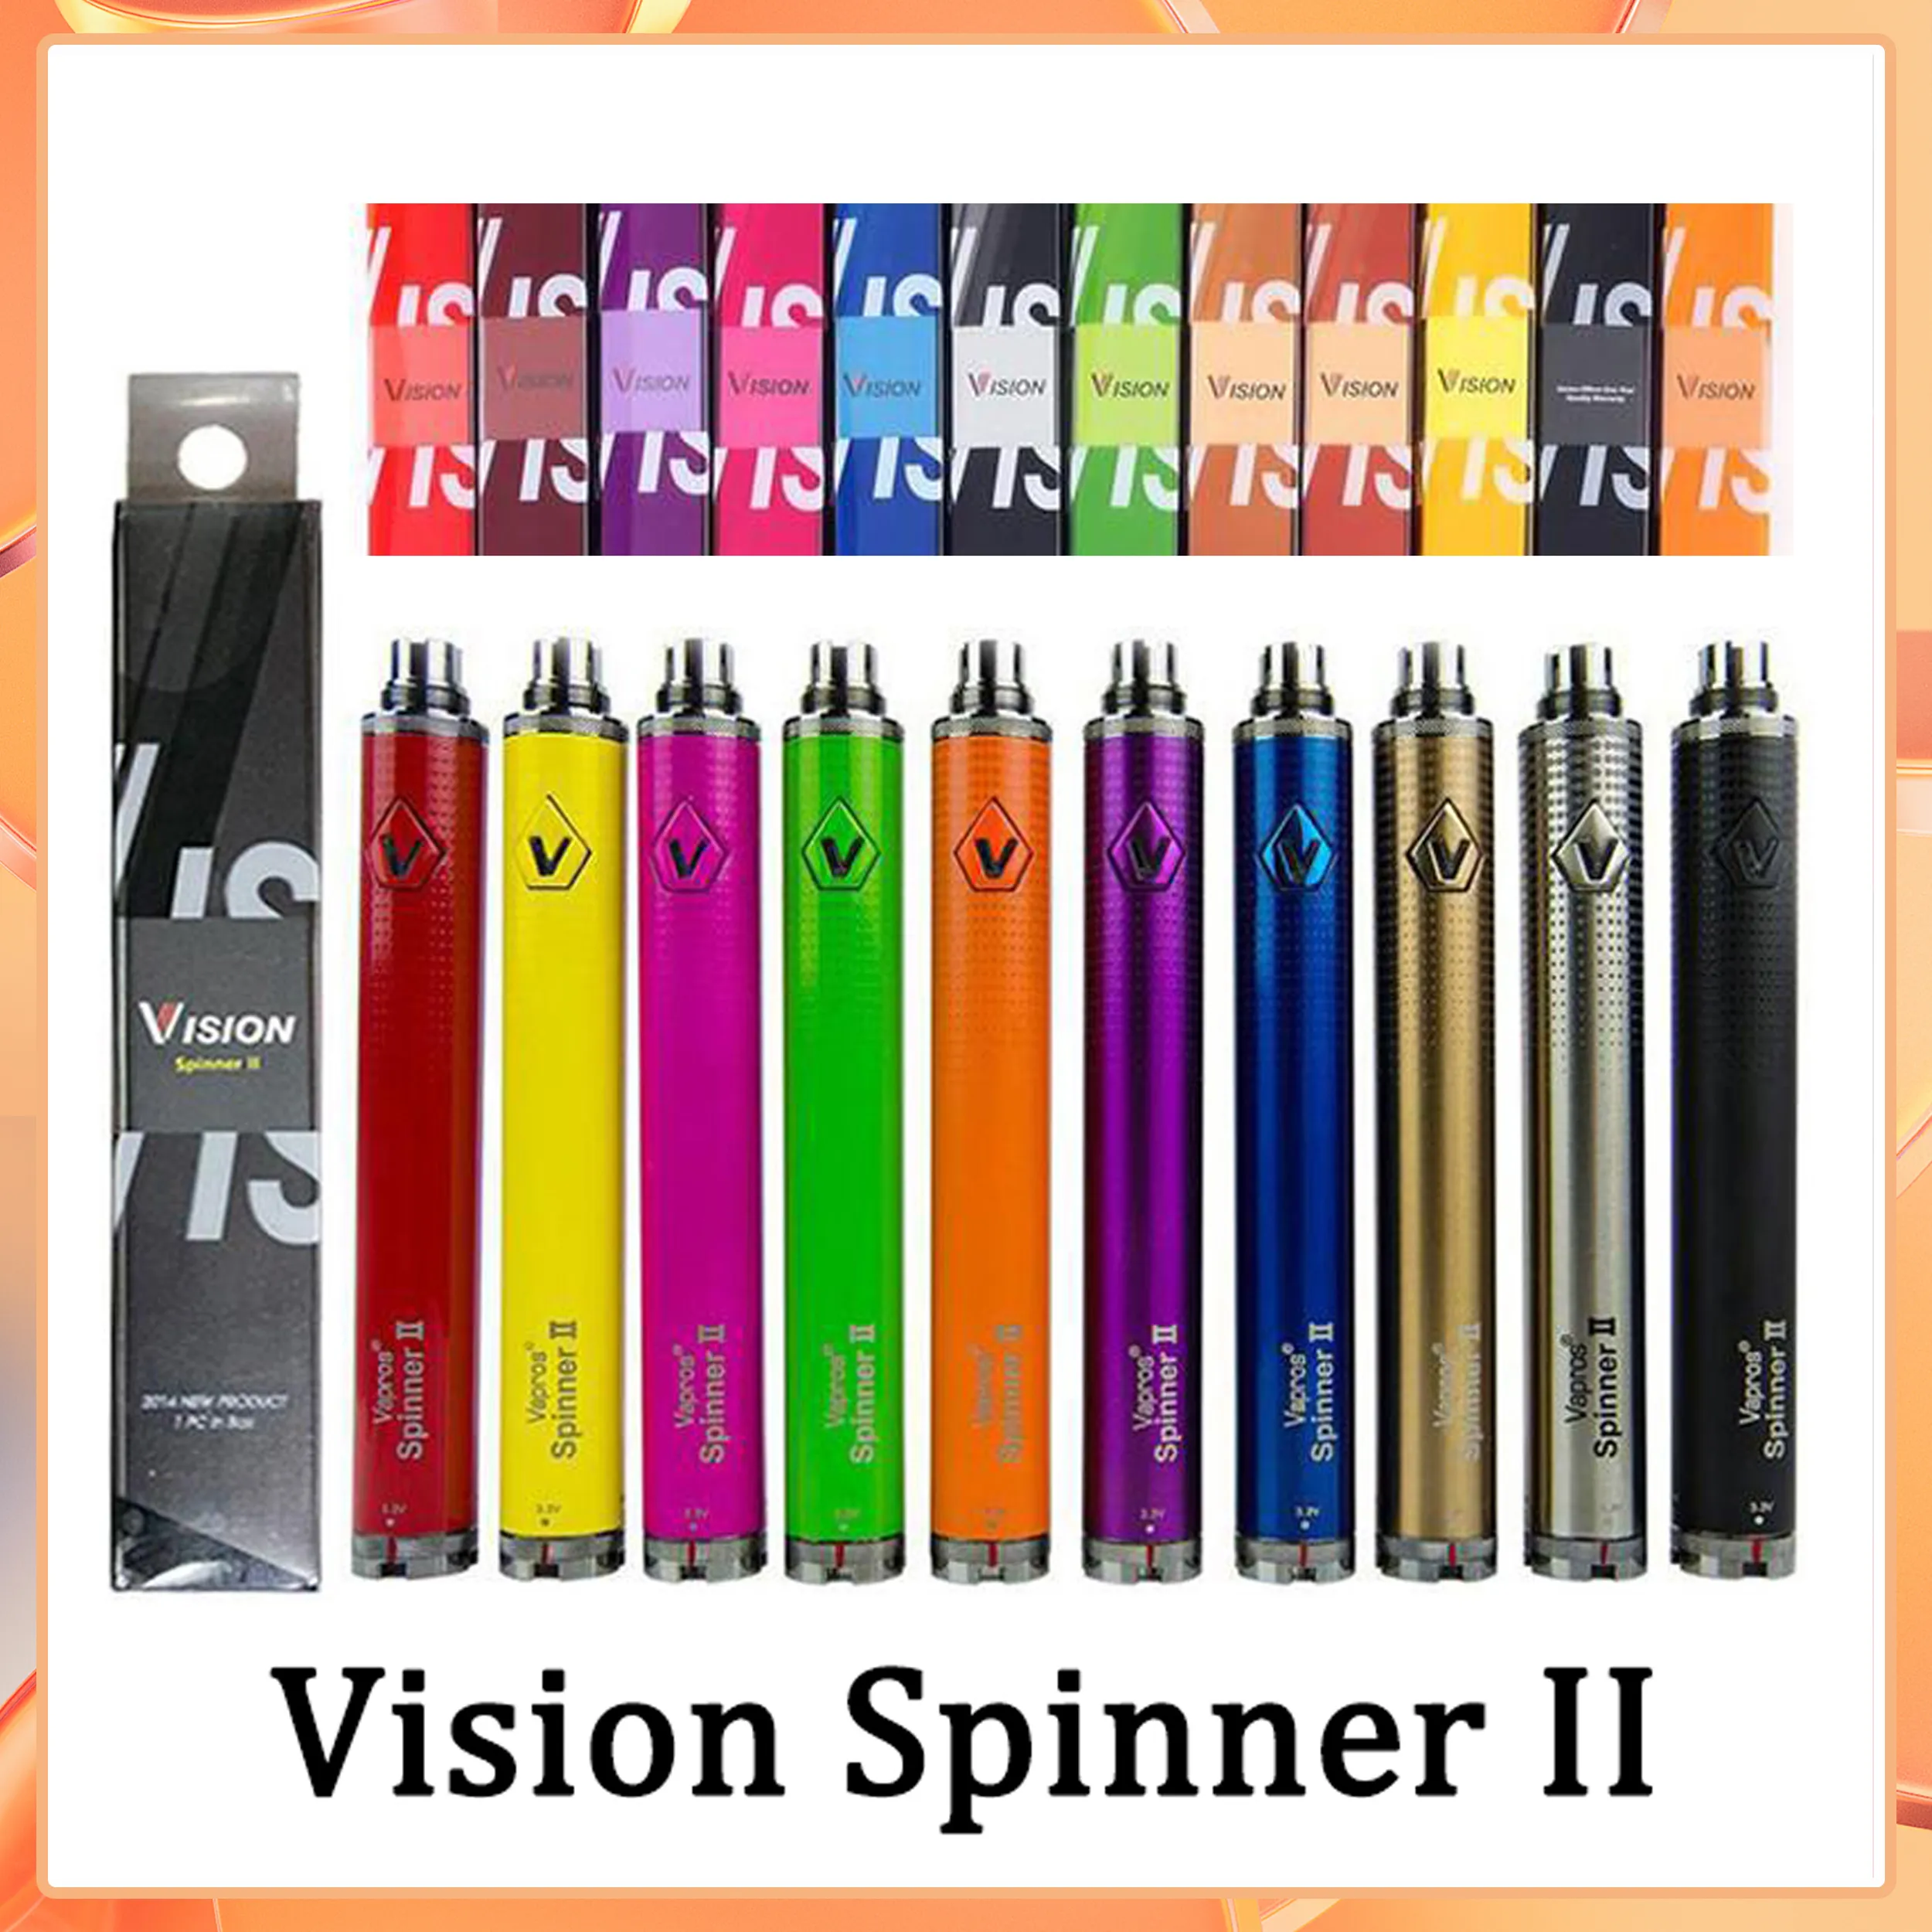 Vision spinner 2 II 1600mah Ego C twist Vision2 Battery E Cigs Electronic Cigarettes atomizer Clearomizer Colorful Fast Send